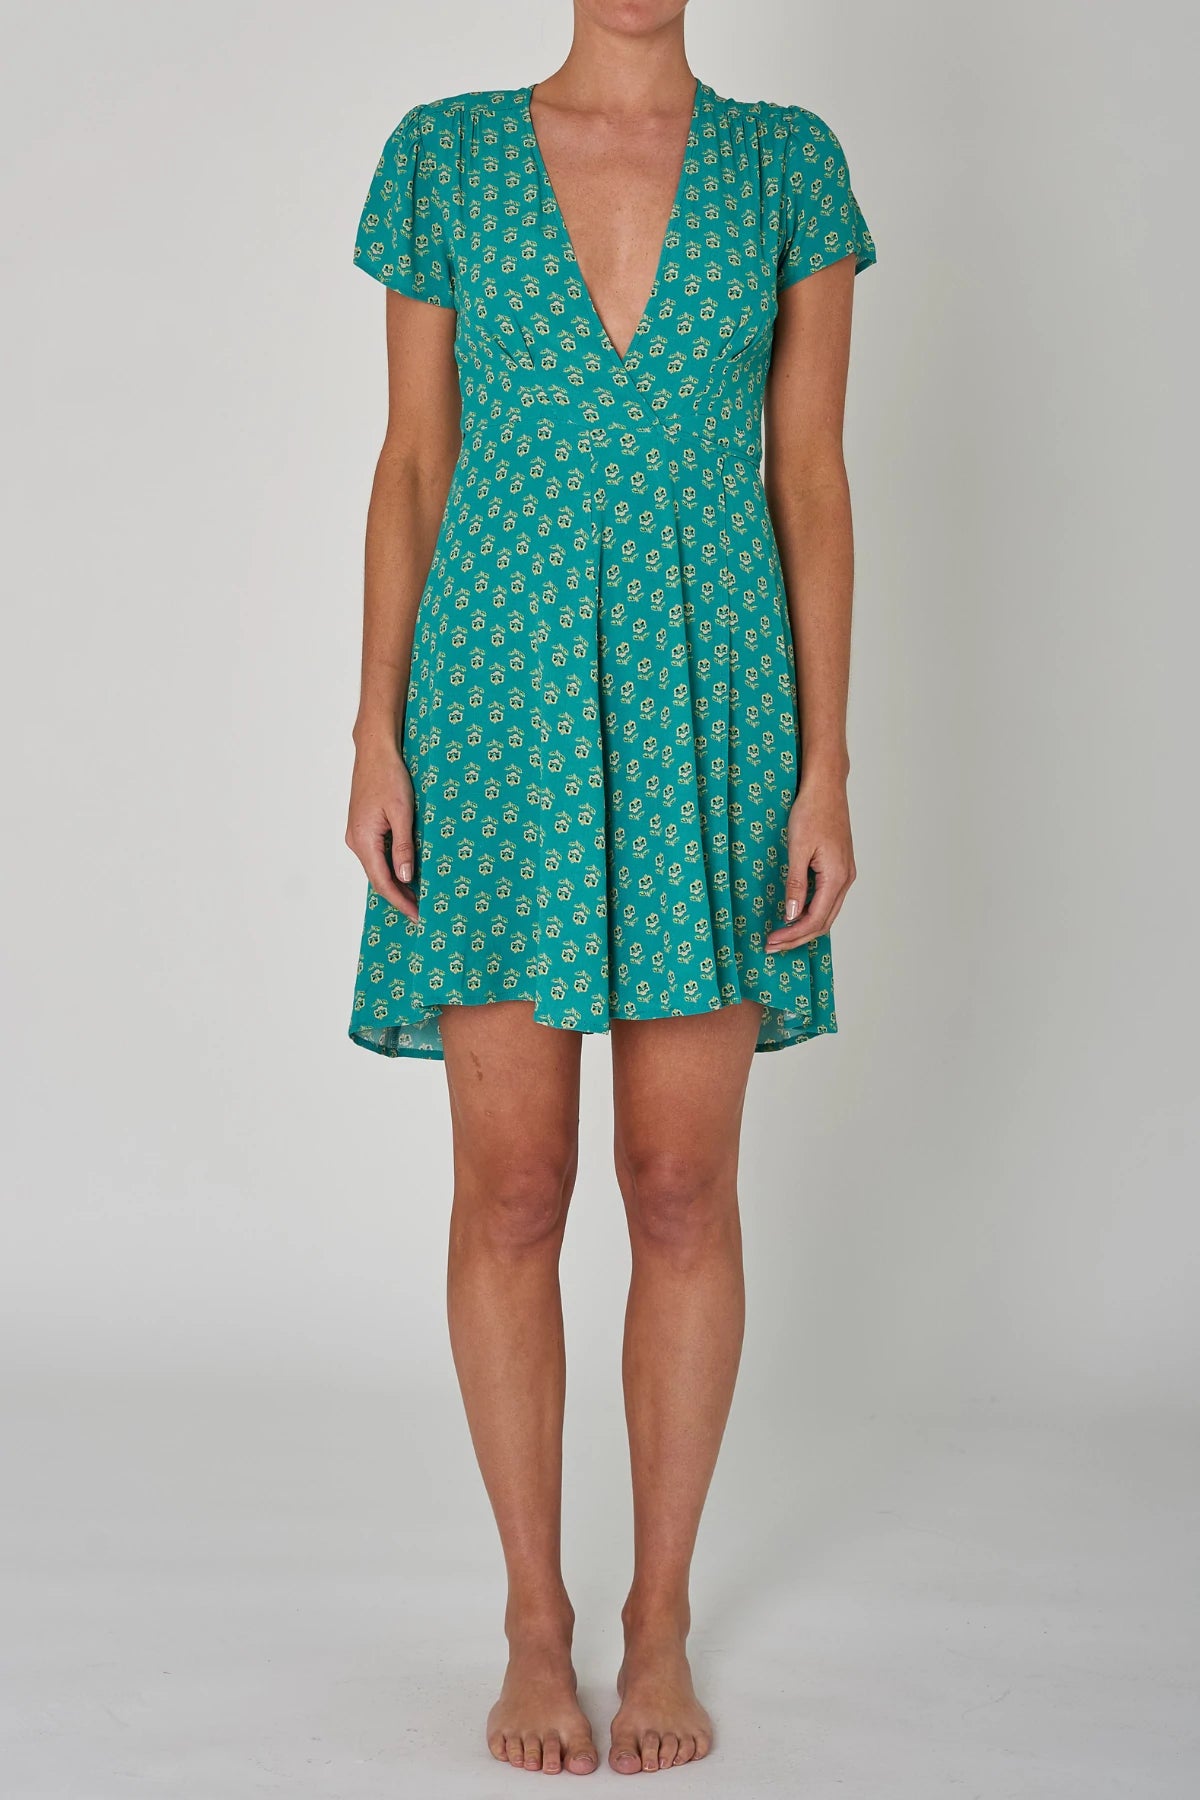 ROLLA'S Cleo Emmylou Wrap Dress in Teal